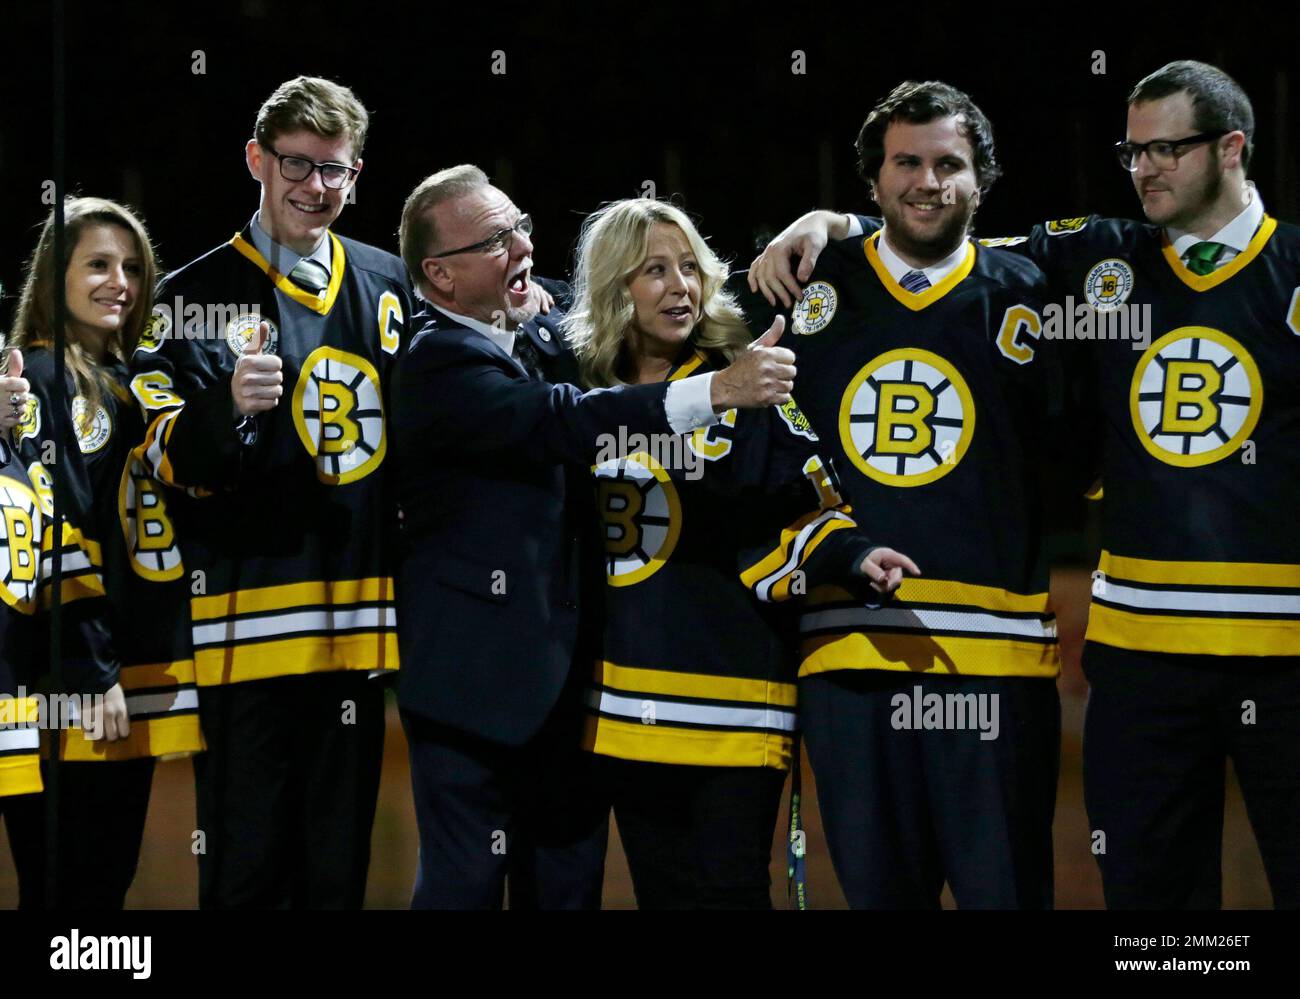 Rick Middleton to have No. 16 jersey retired by the Bruins